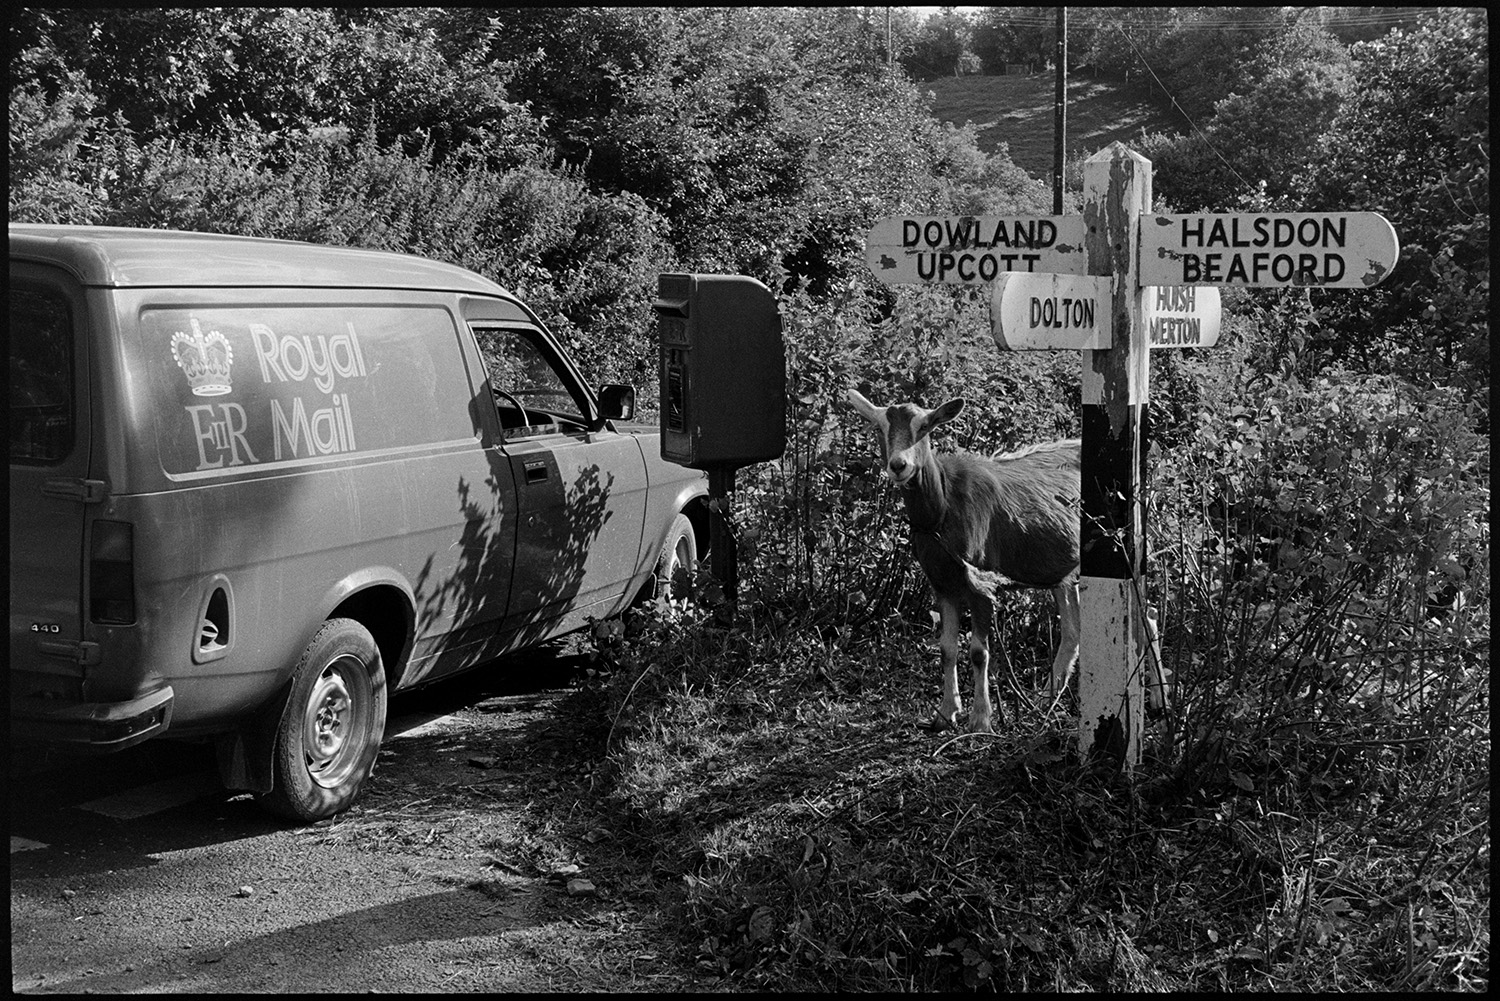 Post van parked beside letter box with tethered goat. 
[A Royal Mail post van parked next to a post box at Woolridge Cross, Dolton. A goat is tethered to the signpost.]